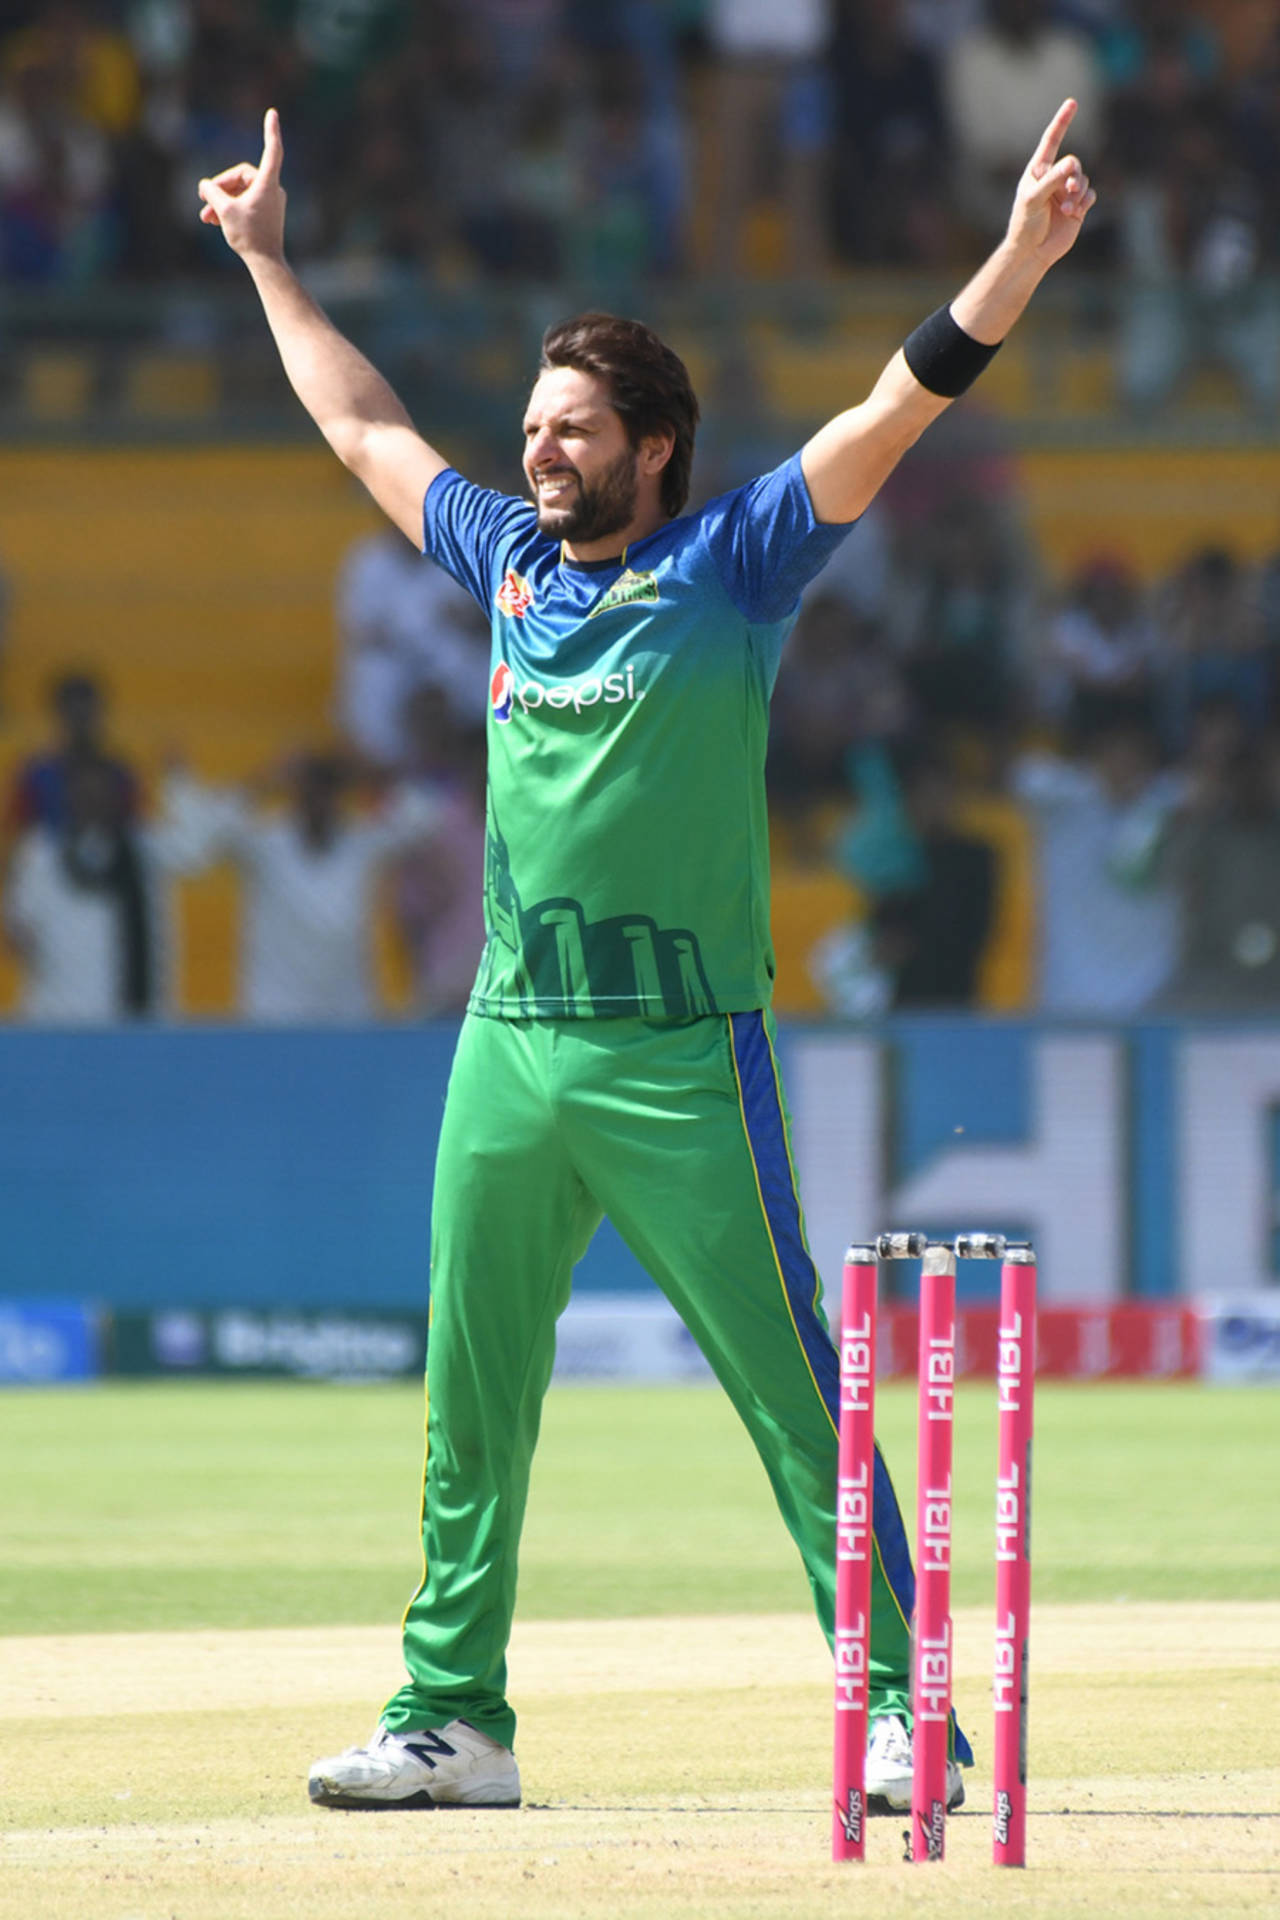 Shahid Afridi will have to undergo a three-day isolated quarantine once he gets to Sri Lanka